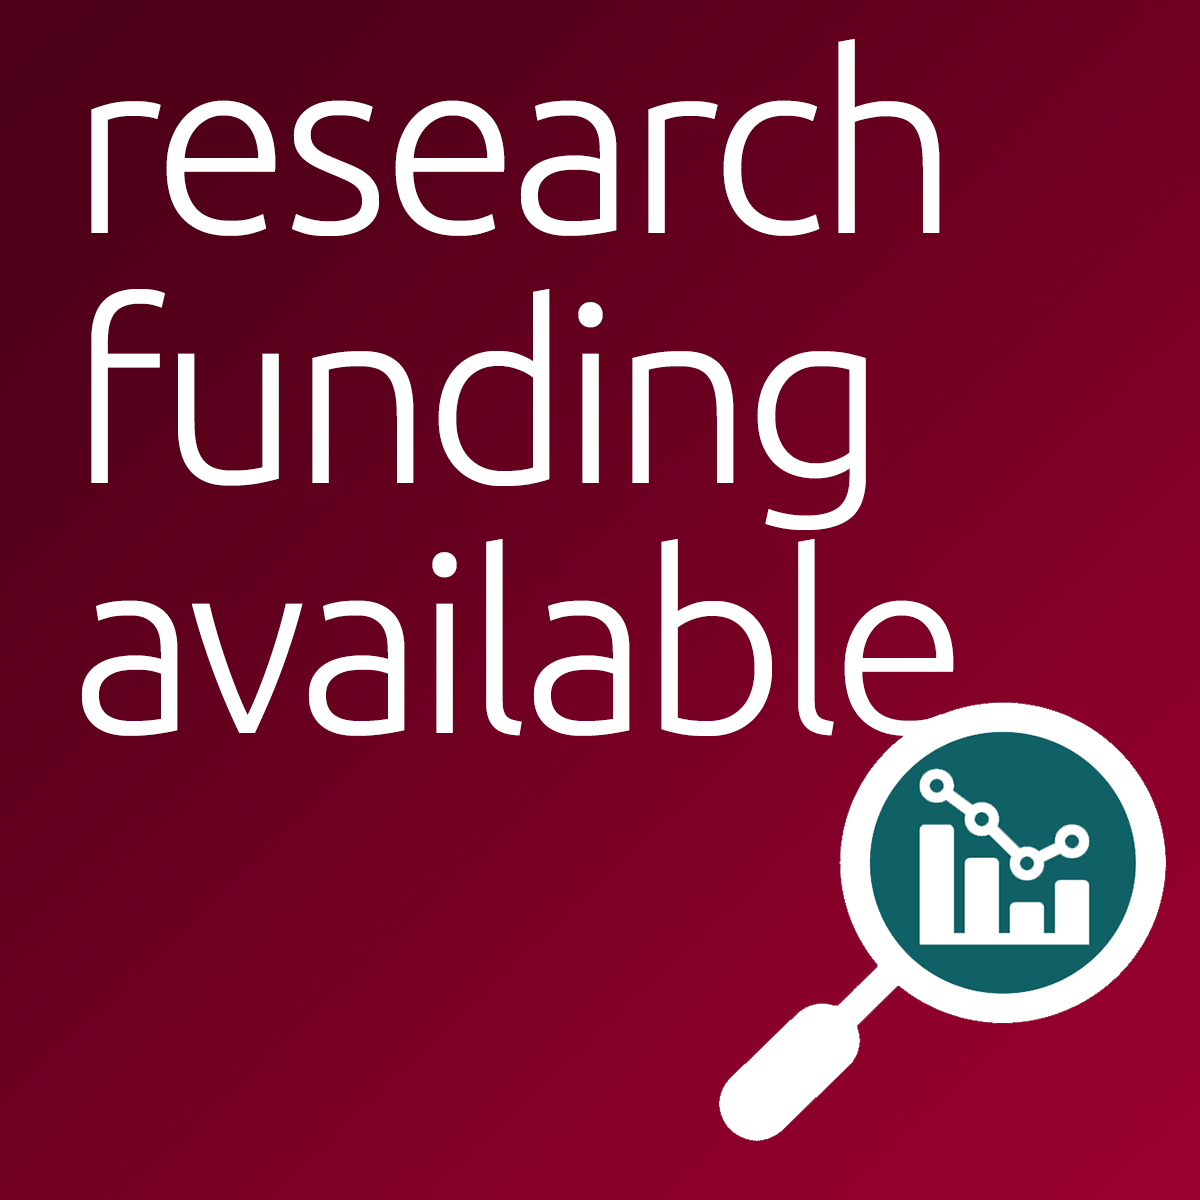 Graphic with text that reads "research funding available" and features a magnifying glass showing a bar and line graph